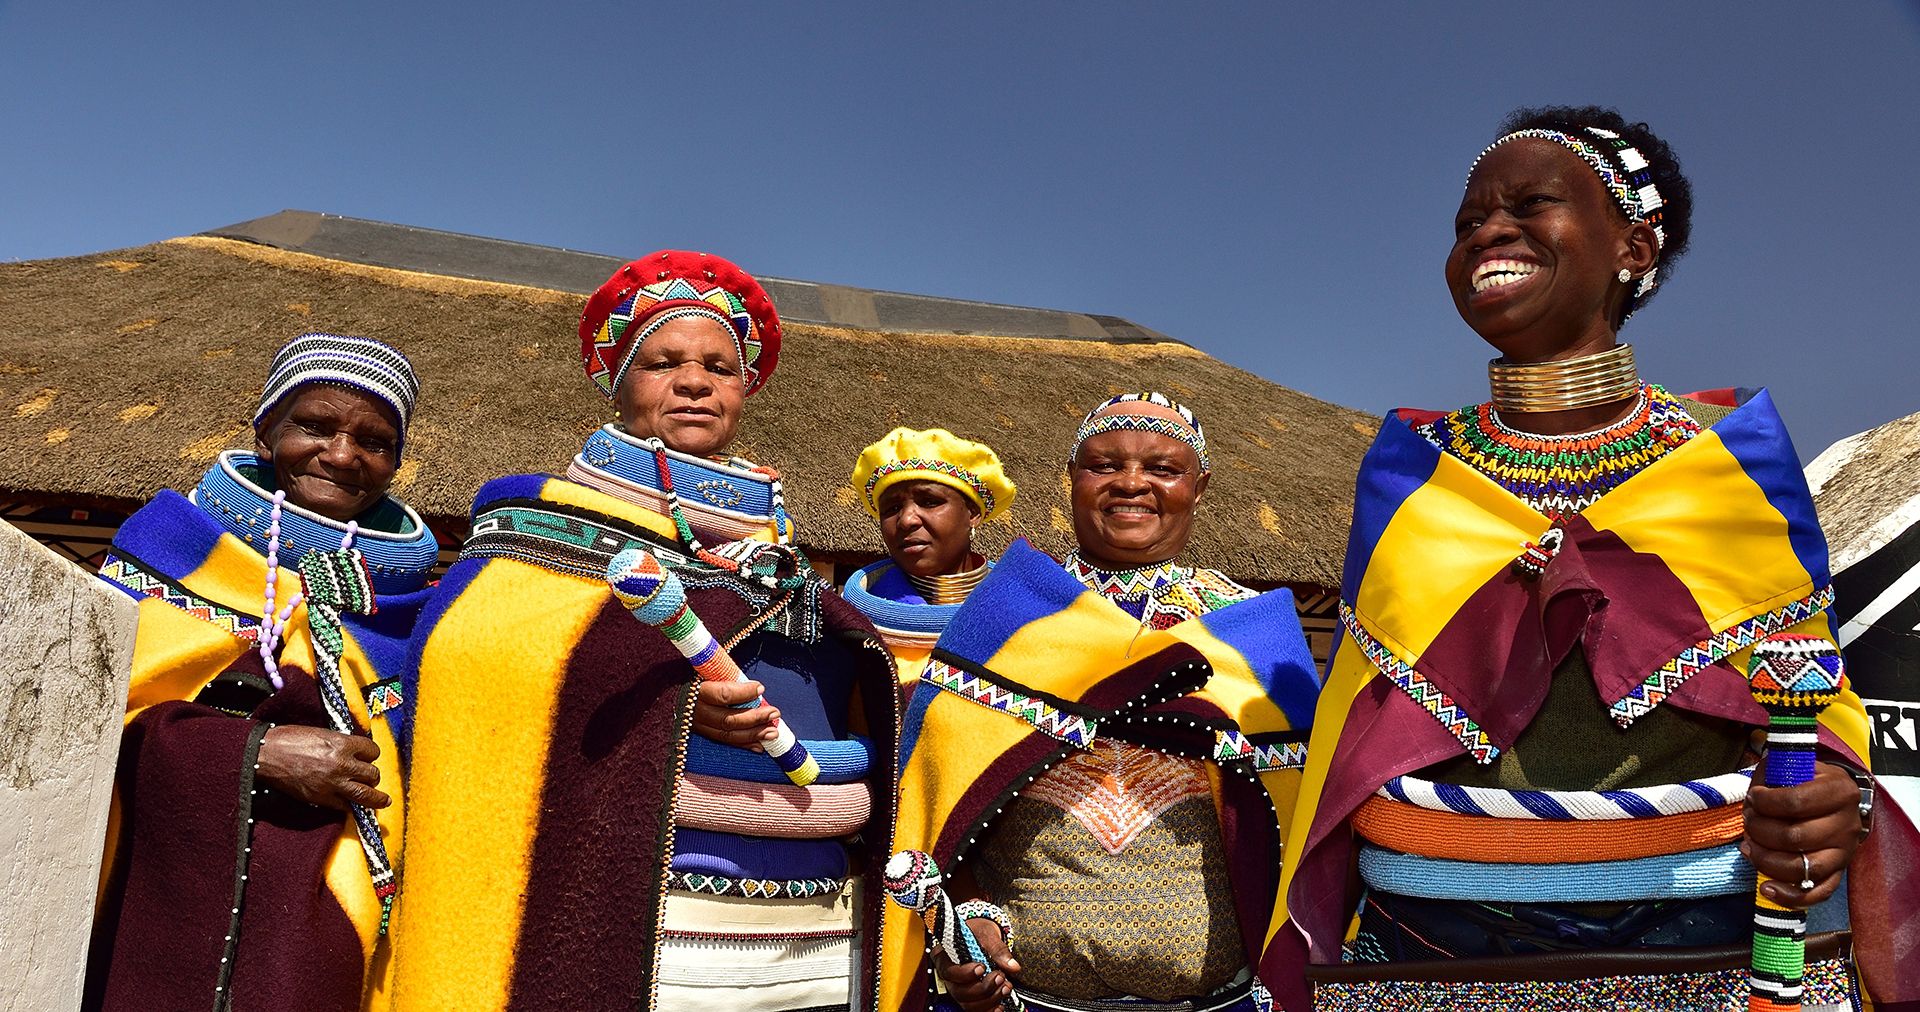 The Ndebele are a population located in different areas of Zimbabwe and in ...